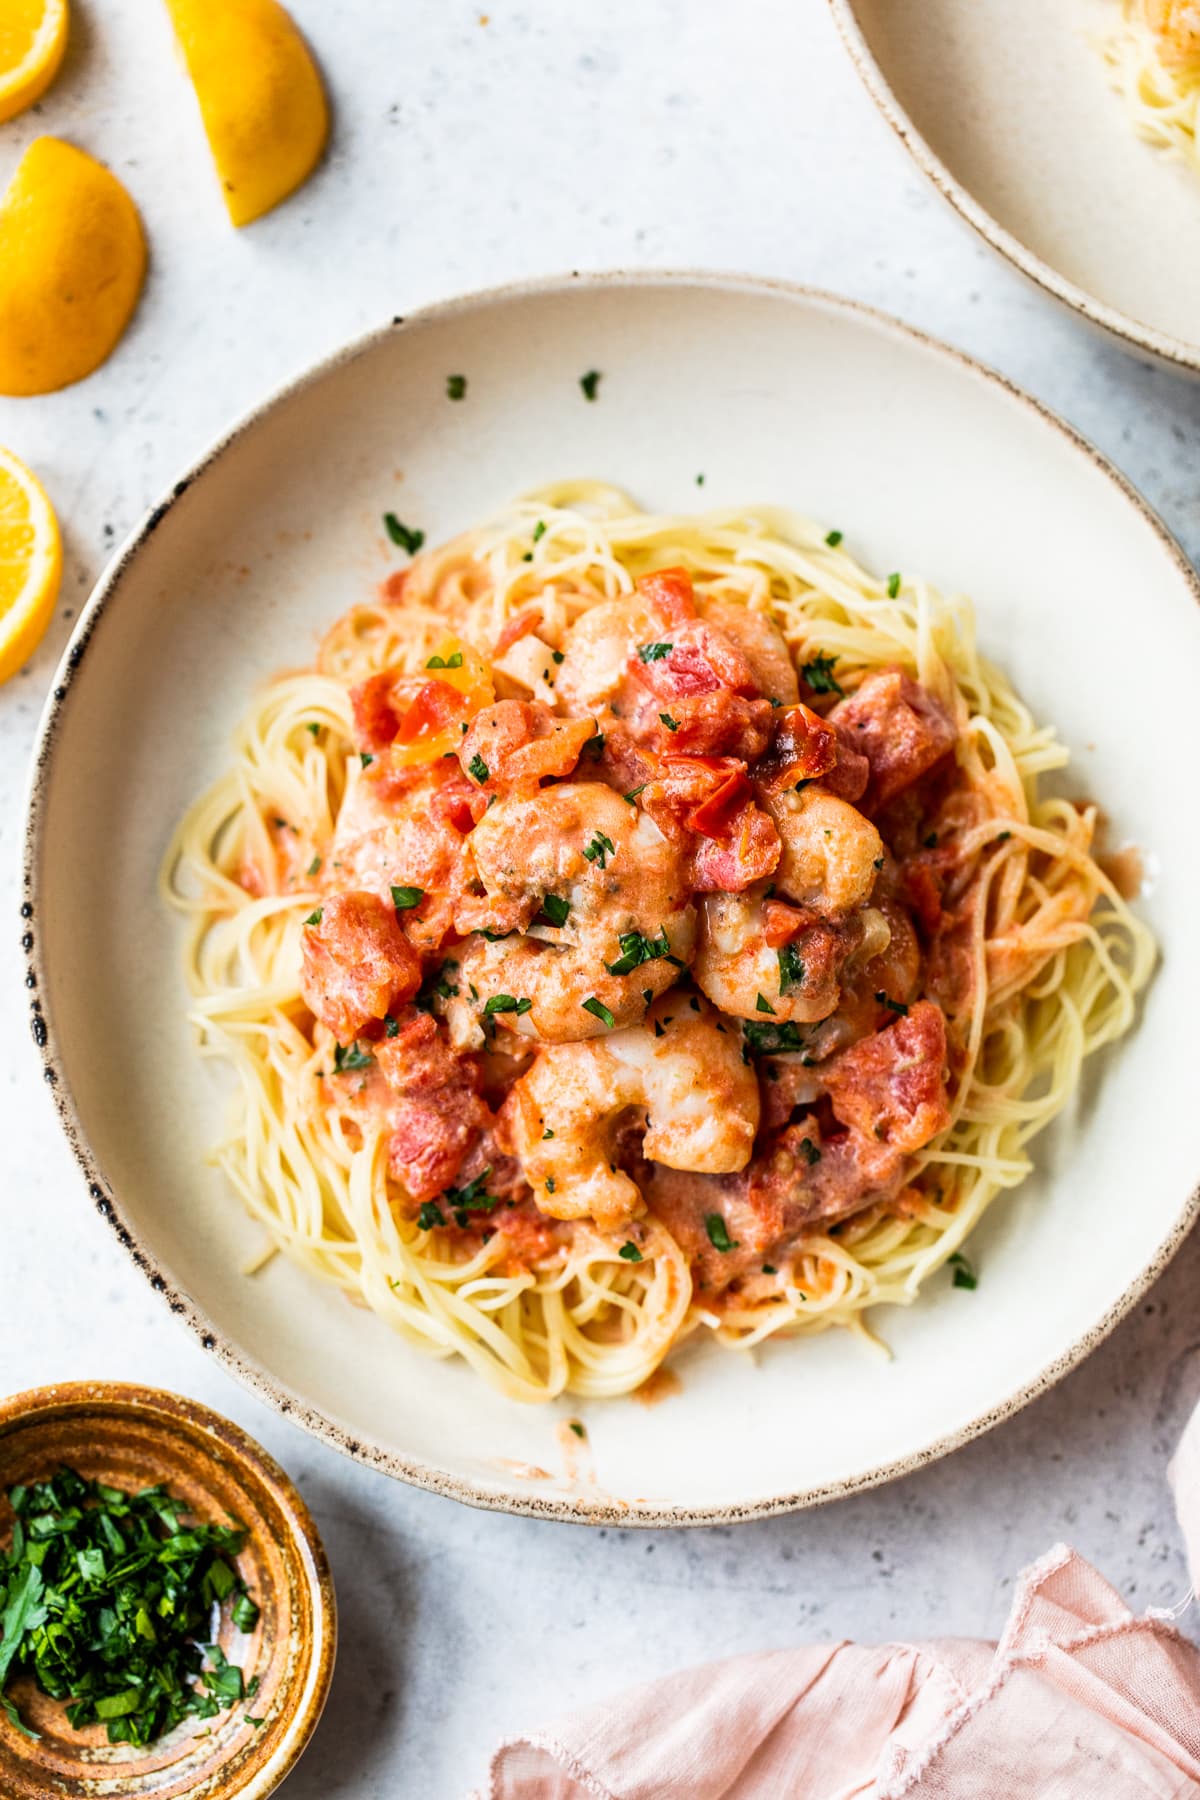 Angel Hair with Shrimp and Tomato Sauce